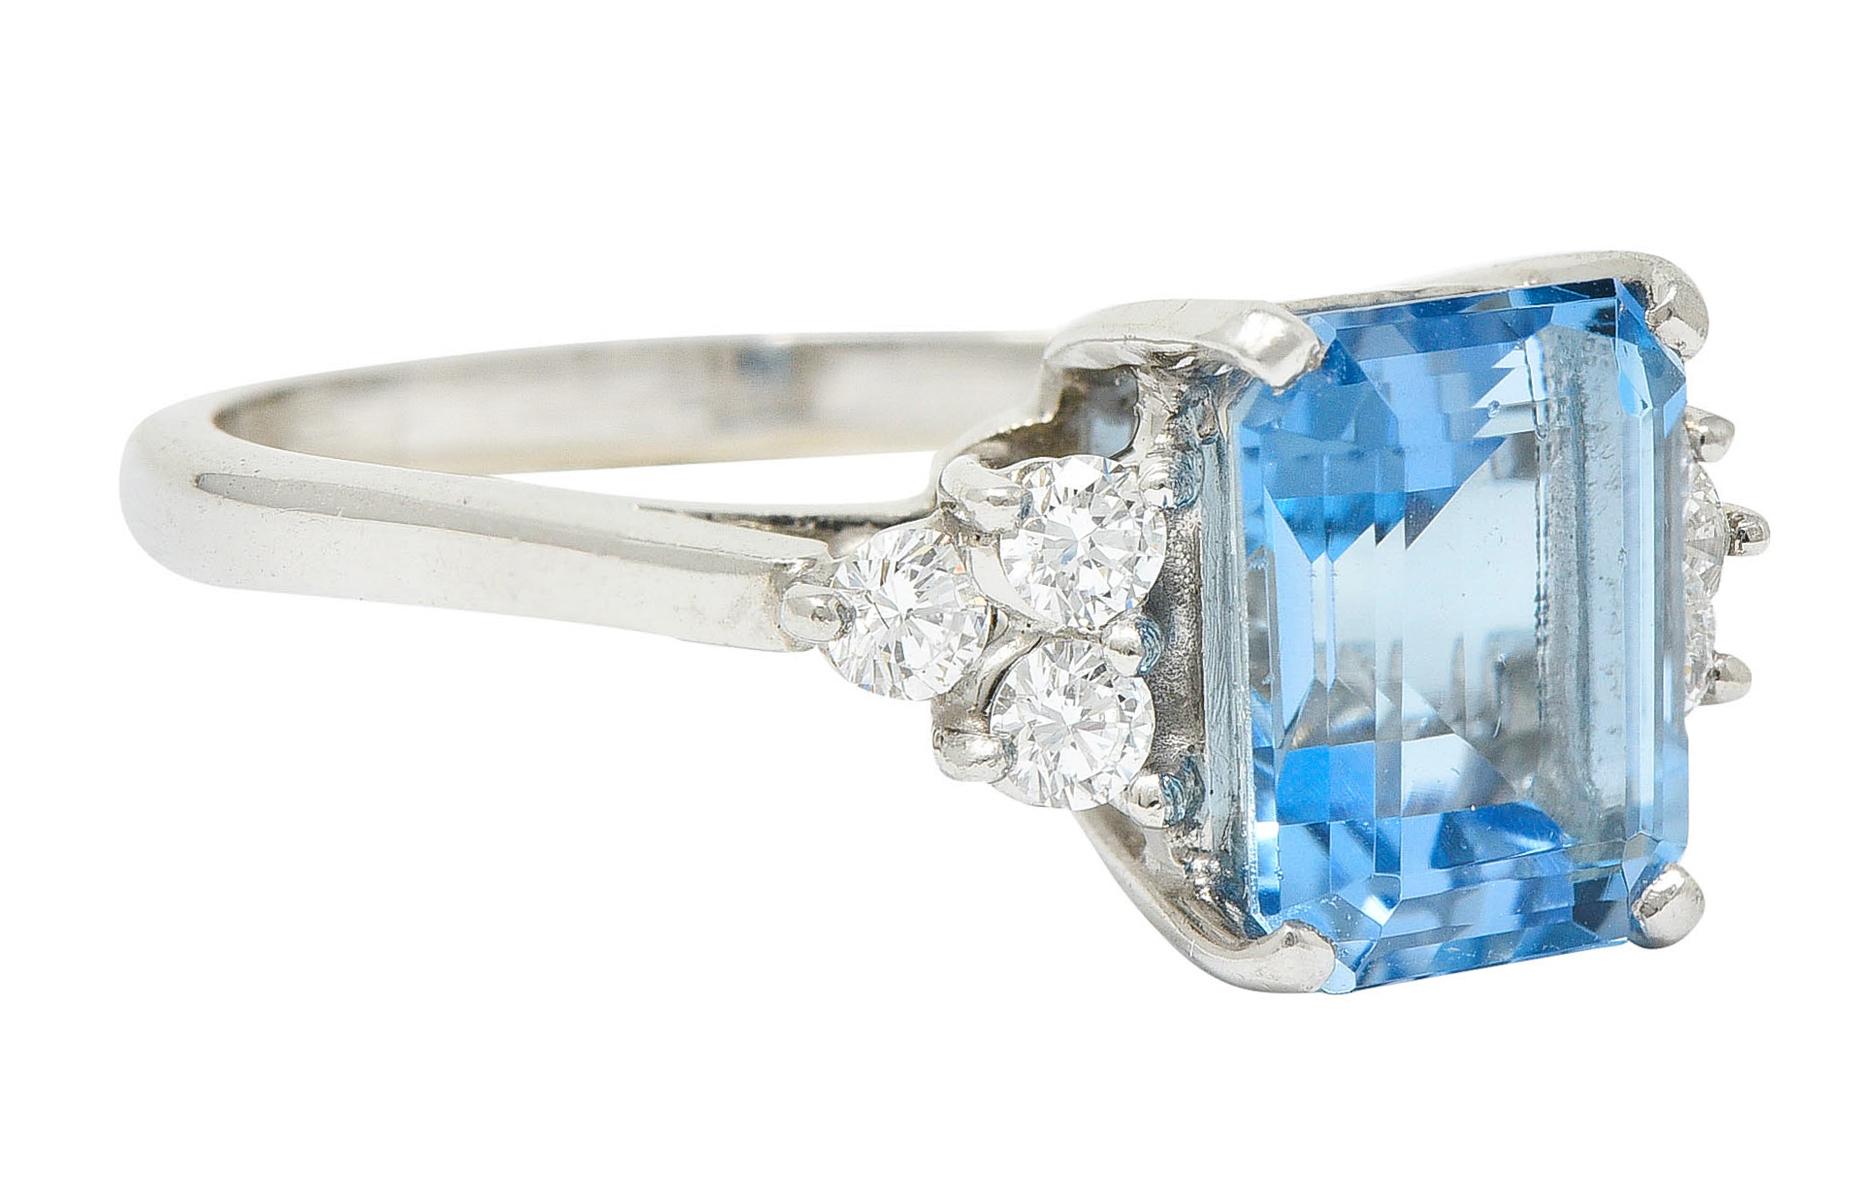 Centering an emerald cut aquamarine weighing approximately 2.15 carat

Transparent with saturated sky blue color

Basket set and flanked by triad clusters of round brilliant cut diamonds

Weighing in total approximately 0.25 carat with G/H color and